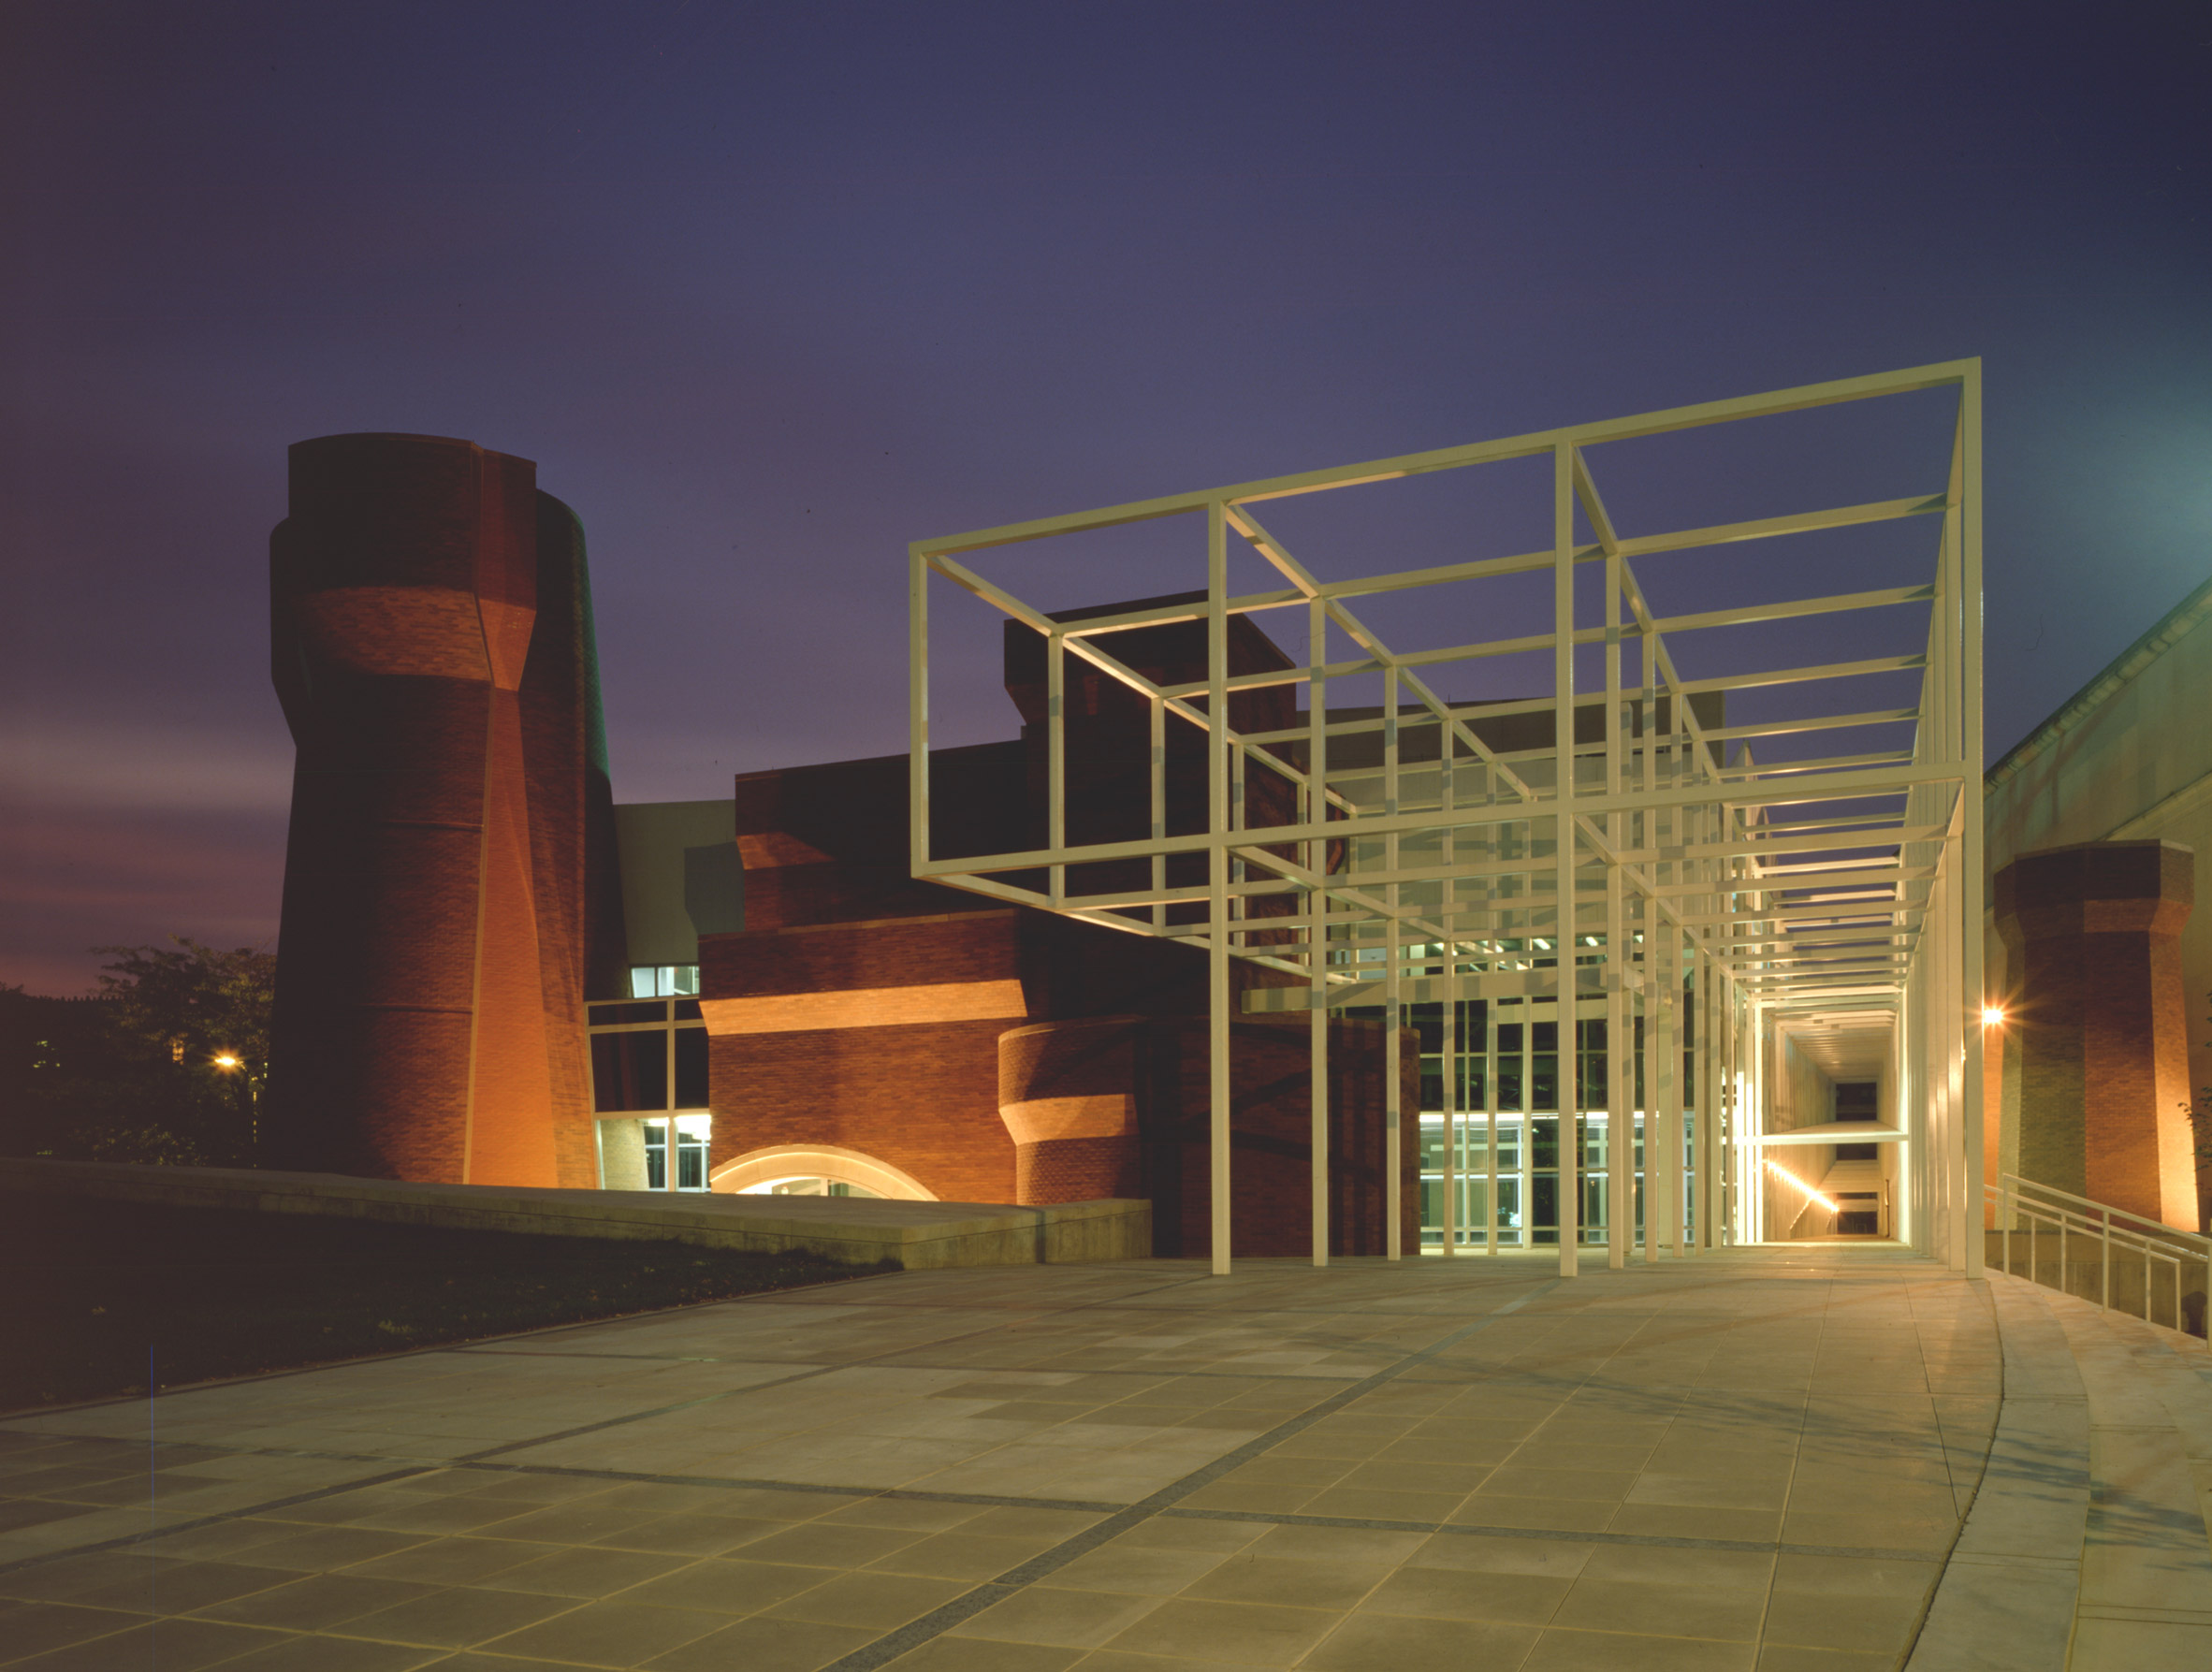 Image of the white steel scaffolding entrance to the Wexner Center for the Arts